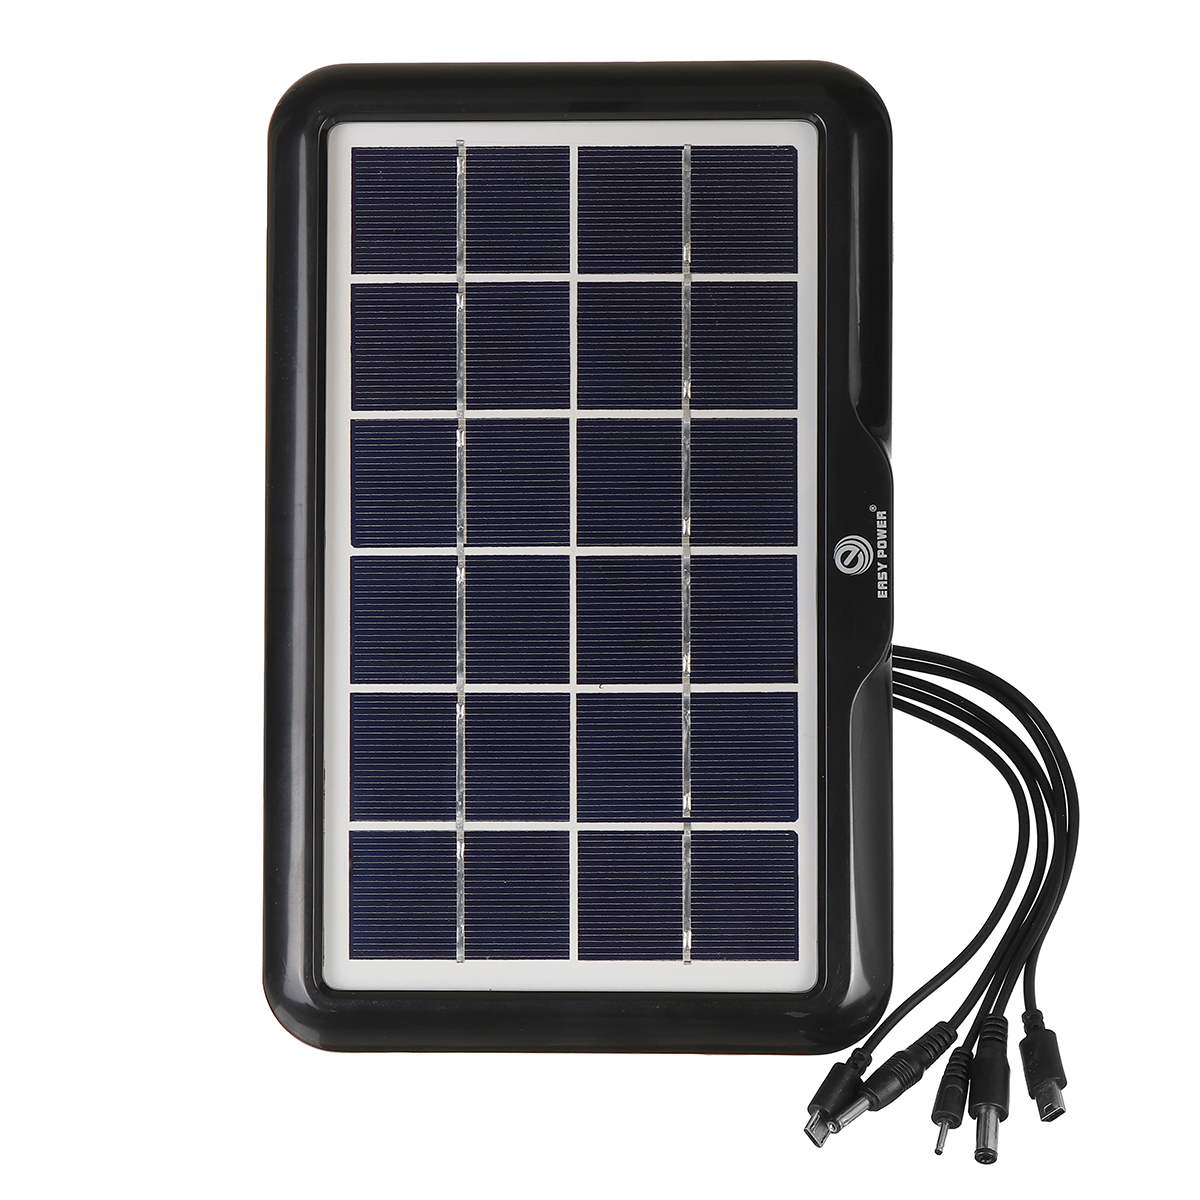 32W-Portable-Outdoor-Solar-Panel-Polycrystalline-Silicon-Solar-Panel-With-Interface-Mobile-Phone-Fan-1928784-5